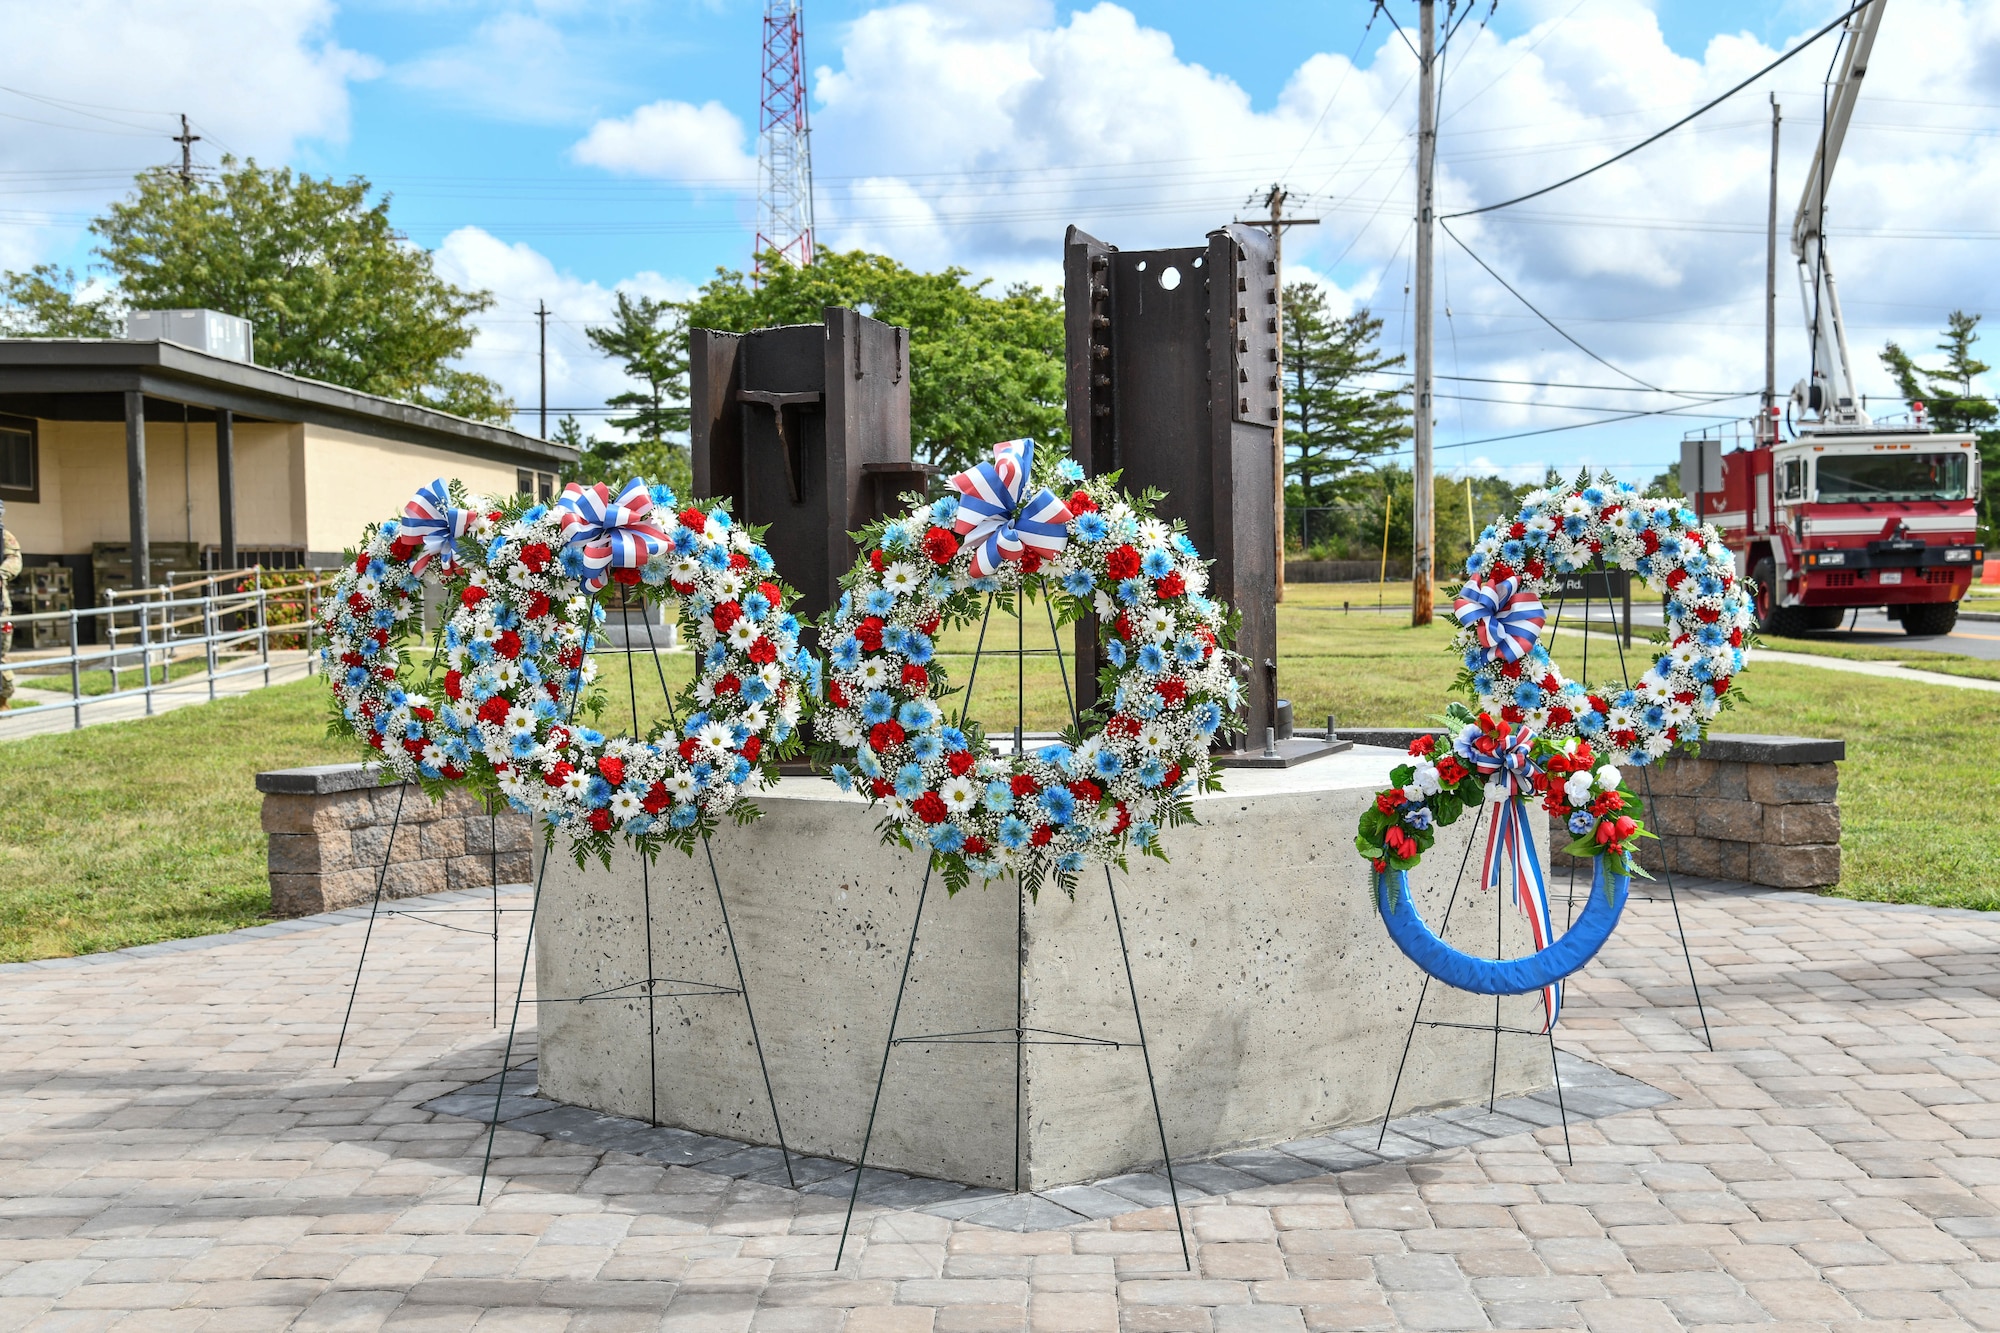 A photo of five commemorative floral wreaths standing in front of a 9/11 memorial